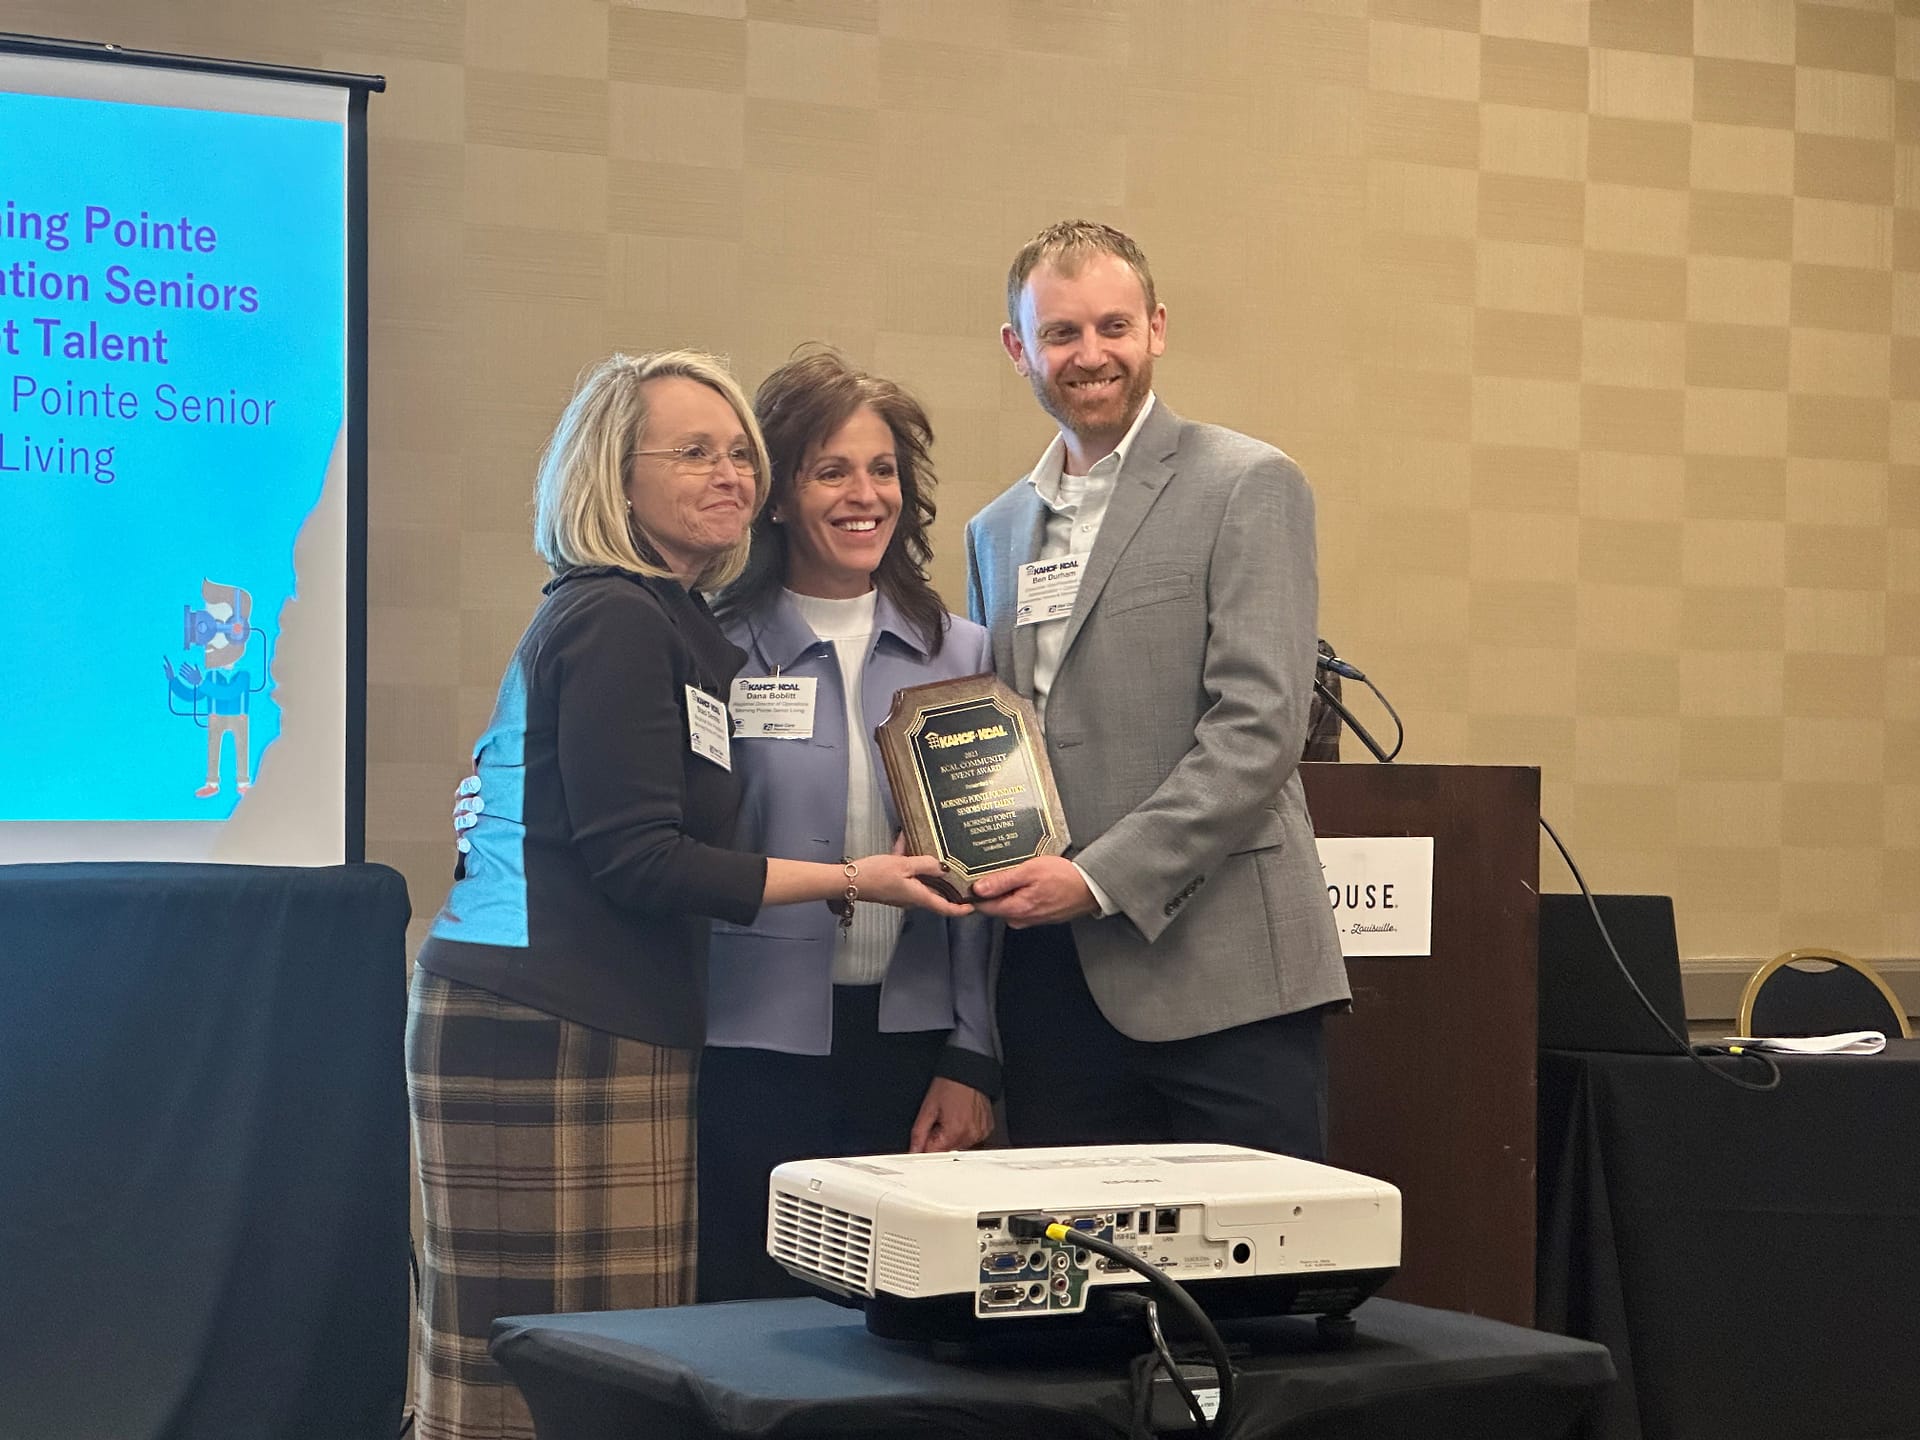 photo of Staci Dennis (left) and Dana Boblitt (center), Bluegrass Region Vice Presidents, receiving the Community Event Award for the Morning Pointe Foundation’s Seniors Got Talent – Lexington showcase from Ben Durham, Member of the KCAL Board of Directors